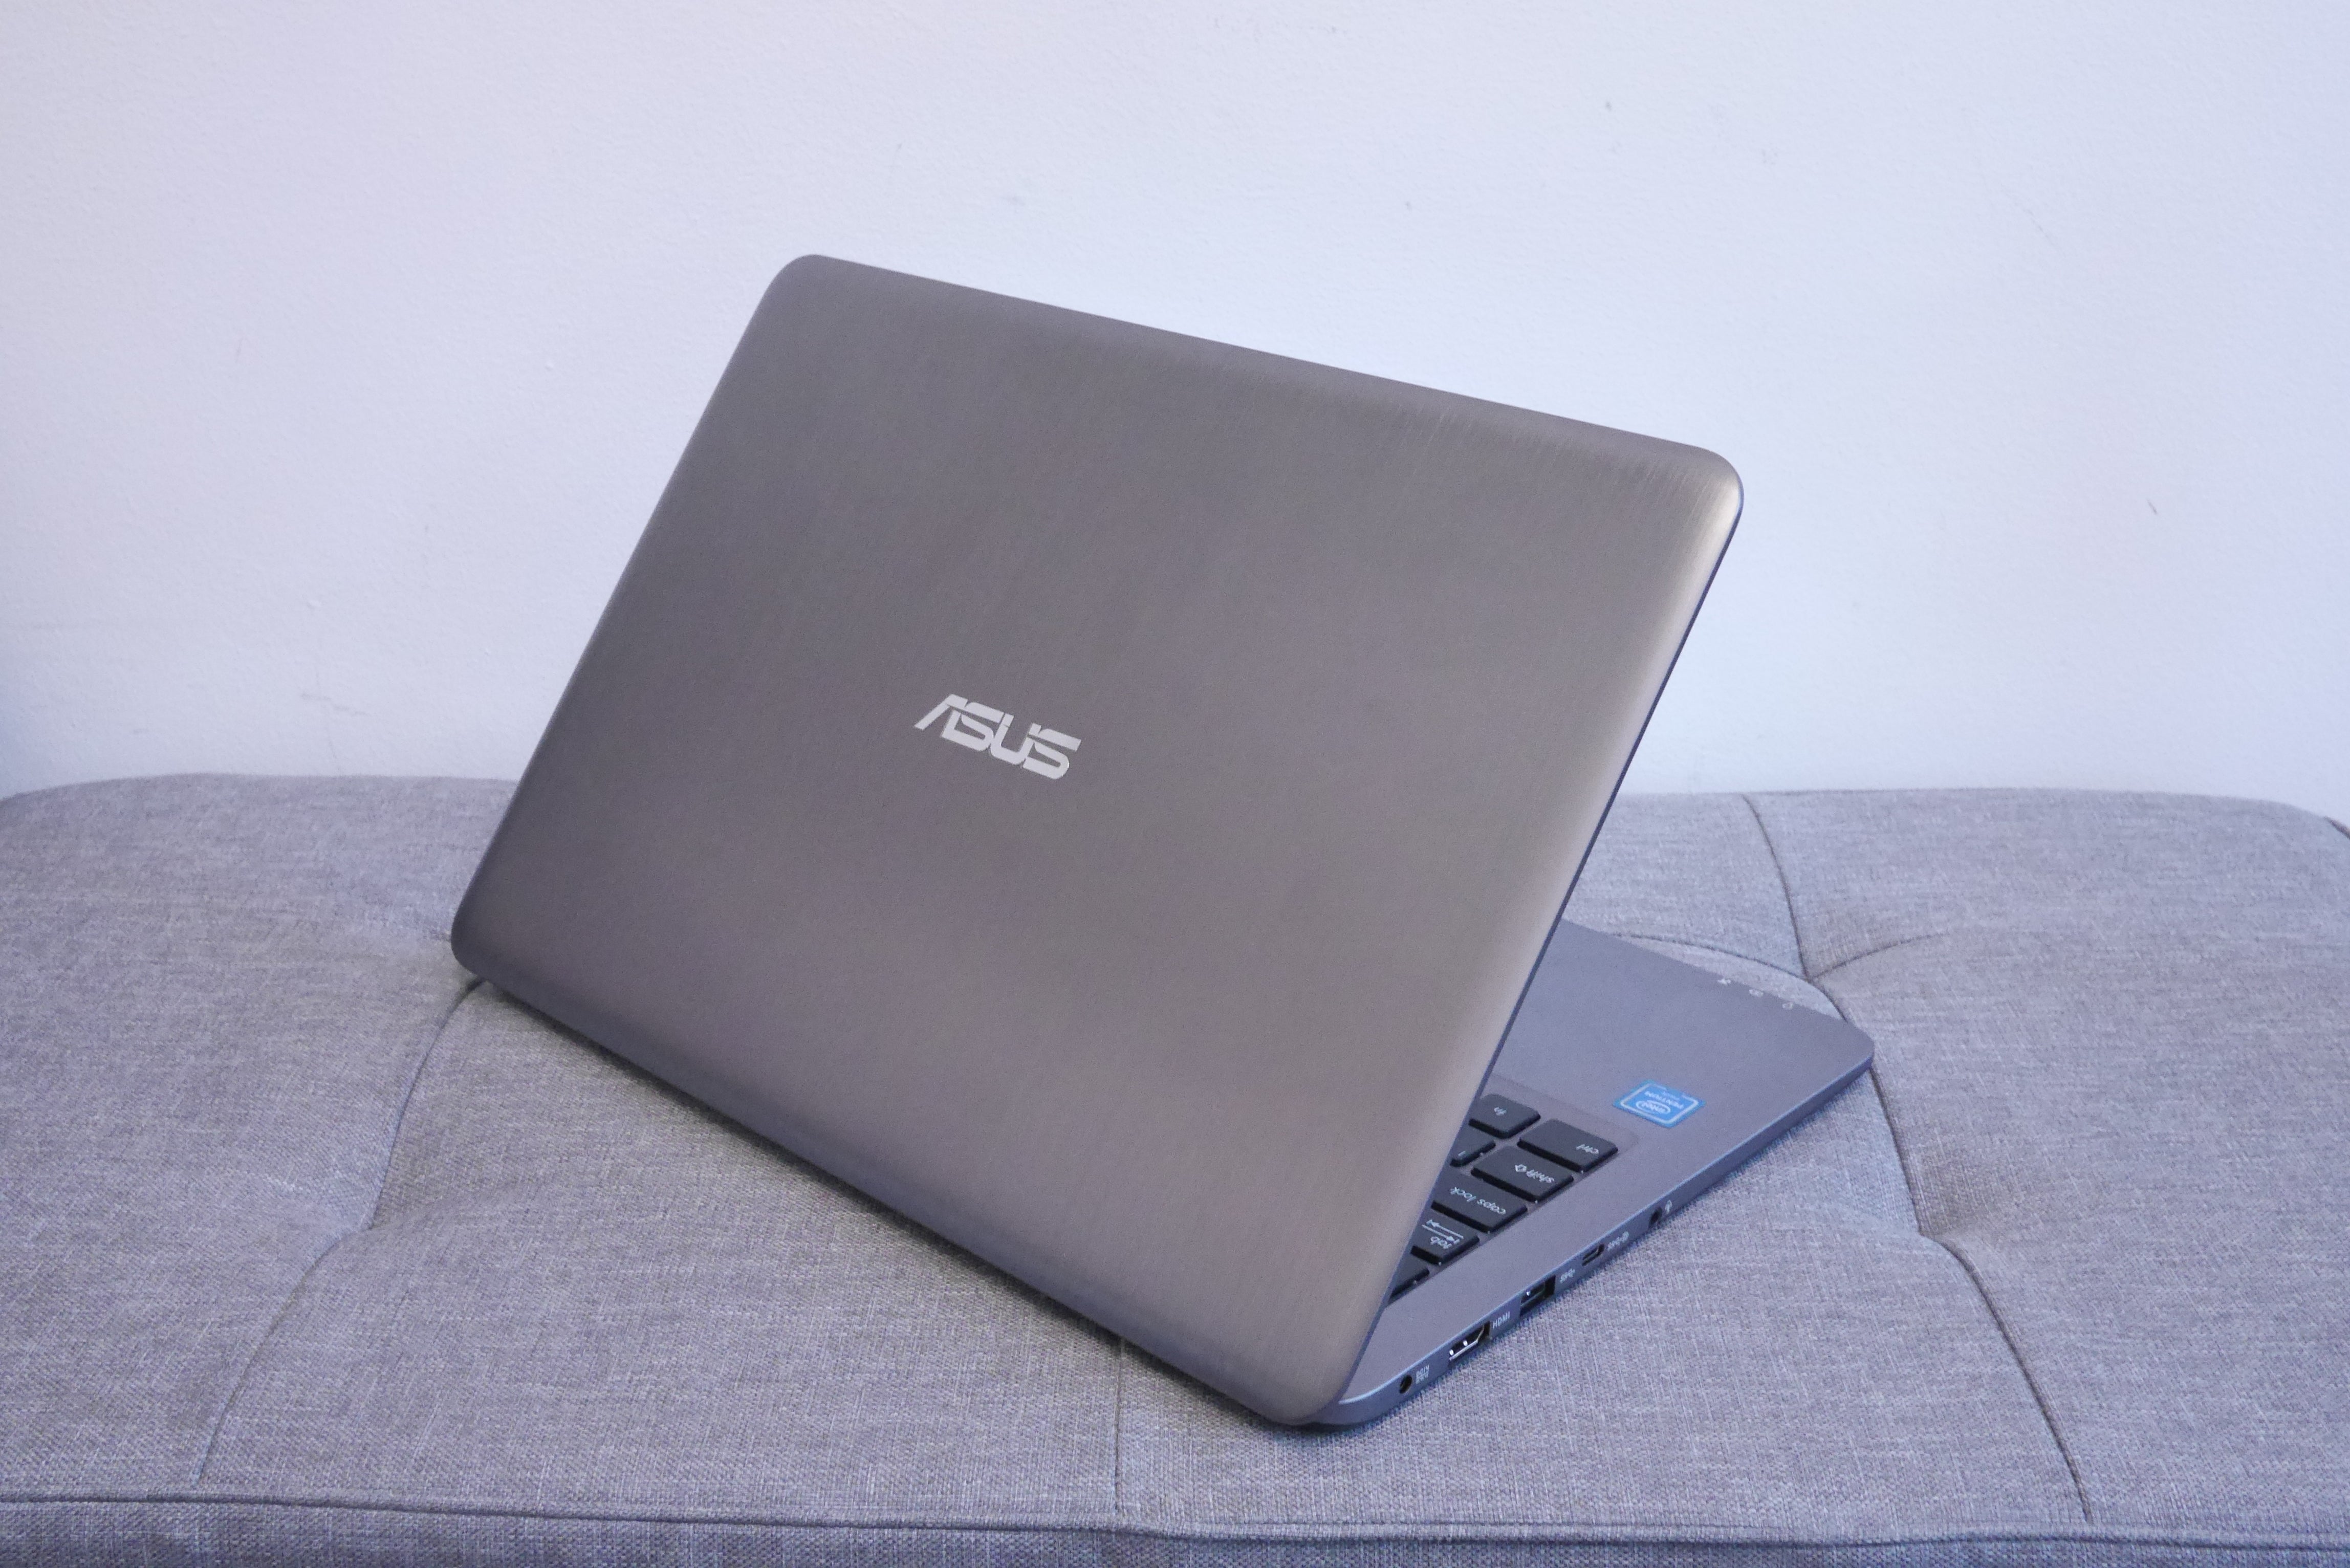 Asus VivoBook L403 laptop on a grey couch.